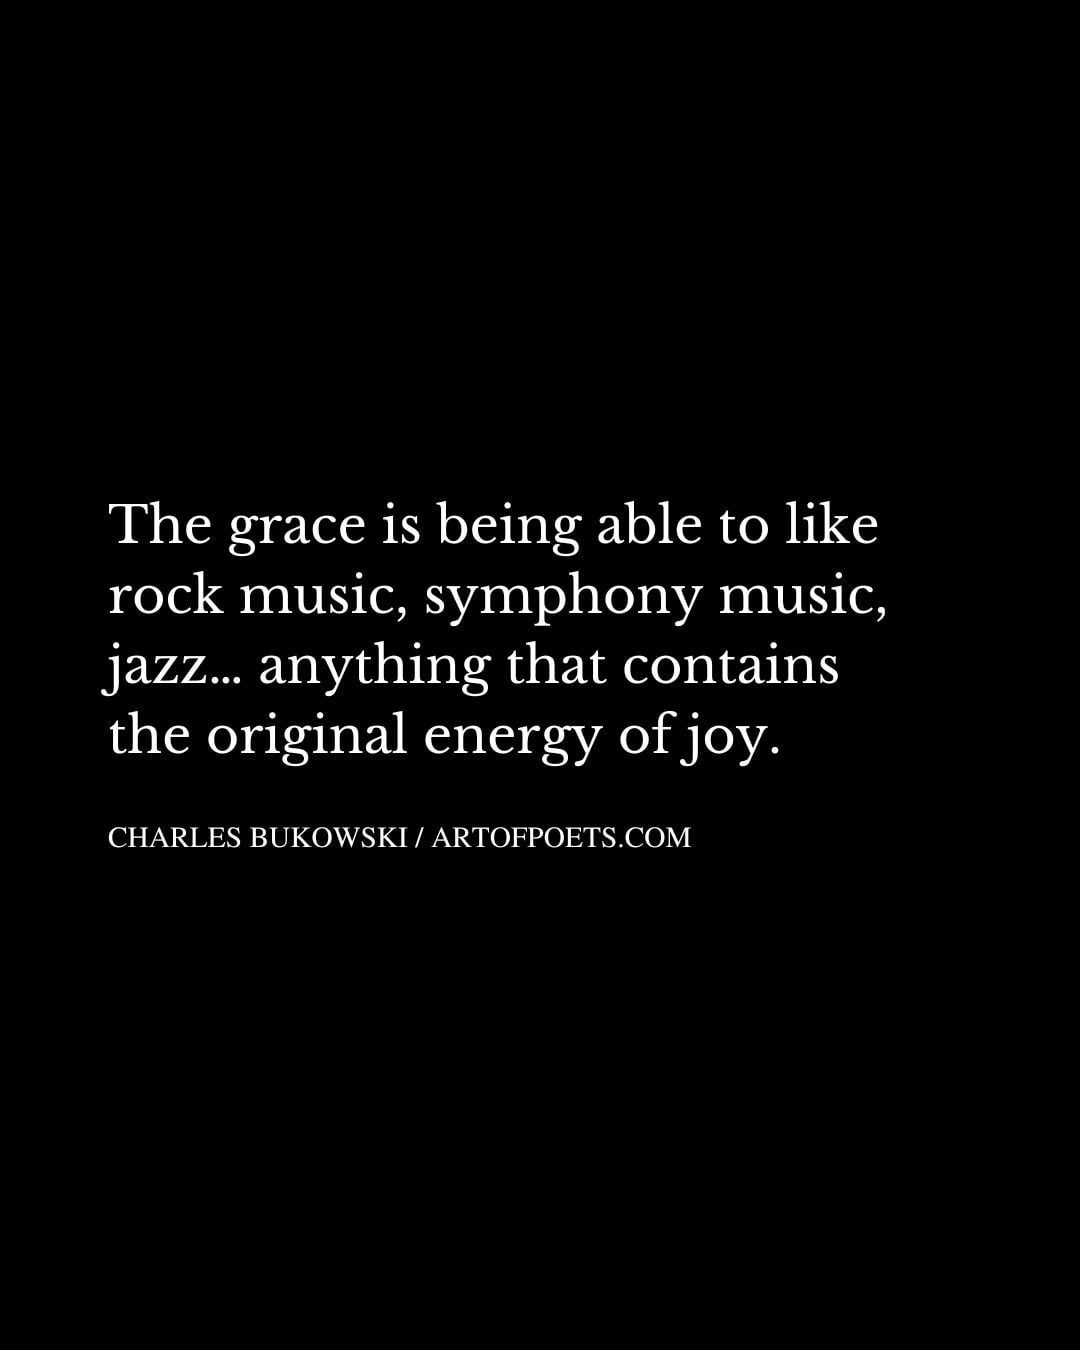 The grace is being able to like rock music symphony music jazz… anything that contains the original energy of joy 1